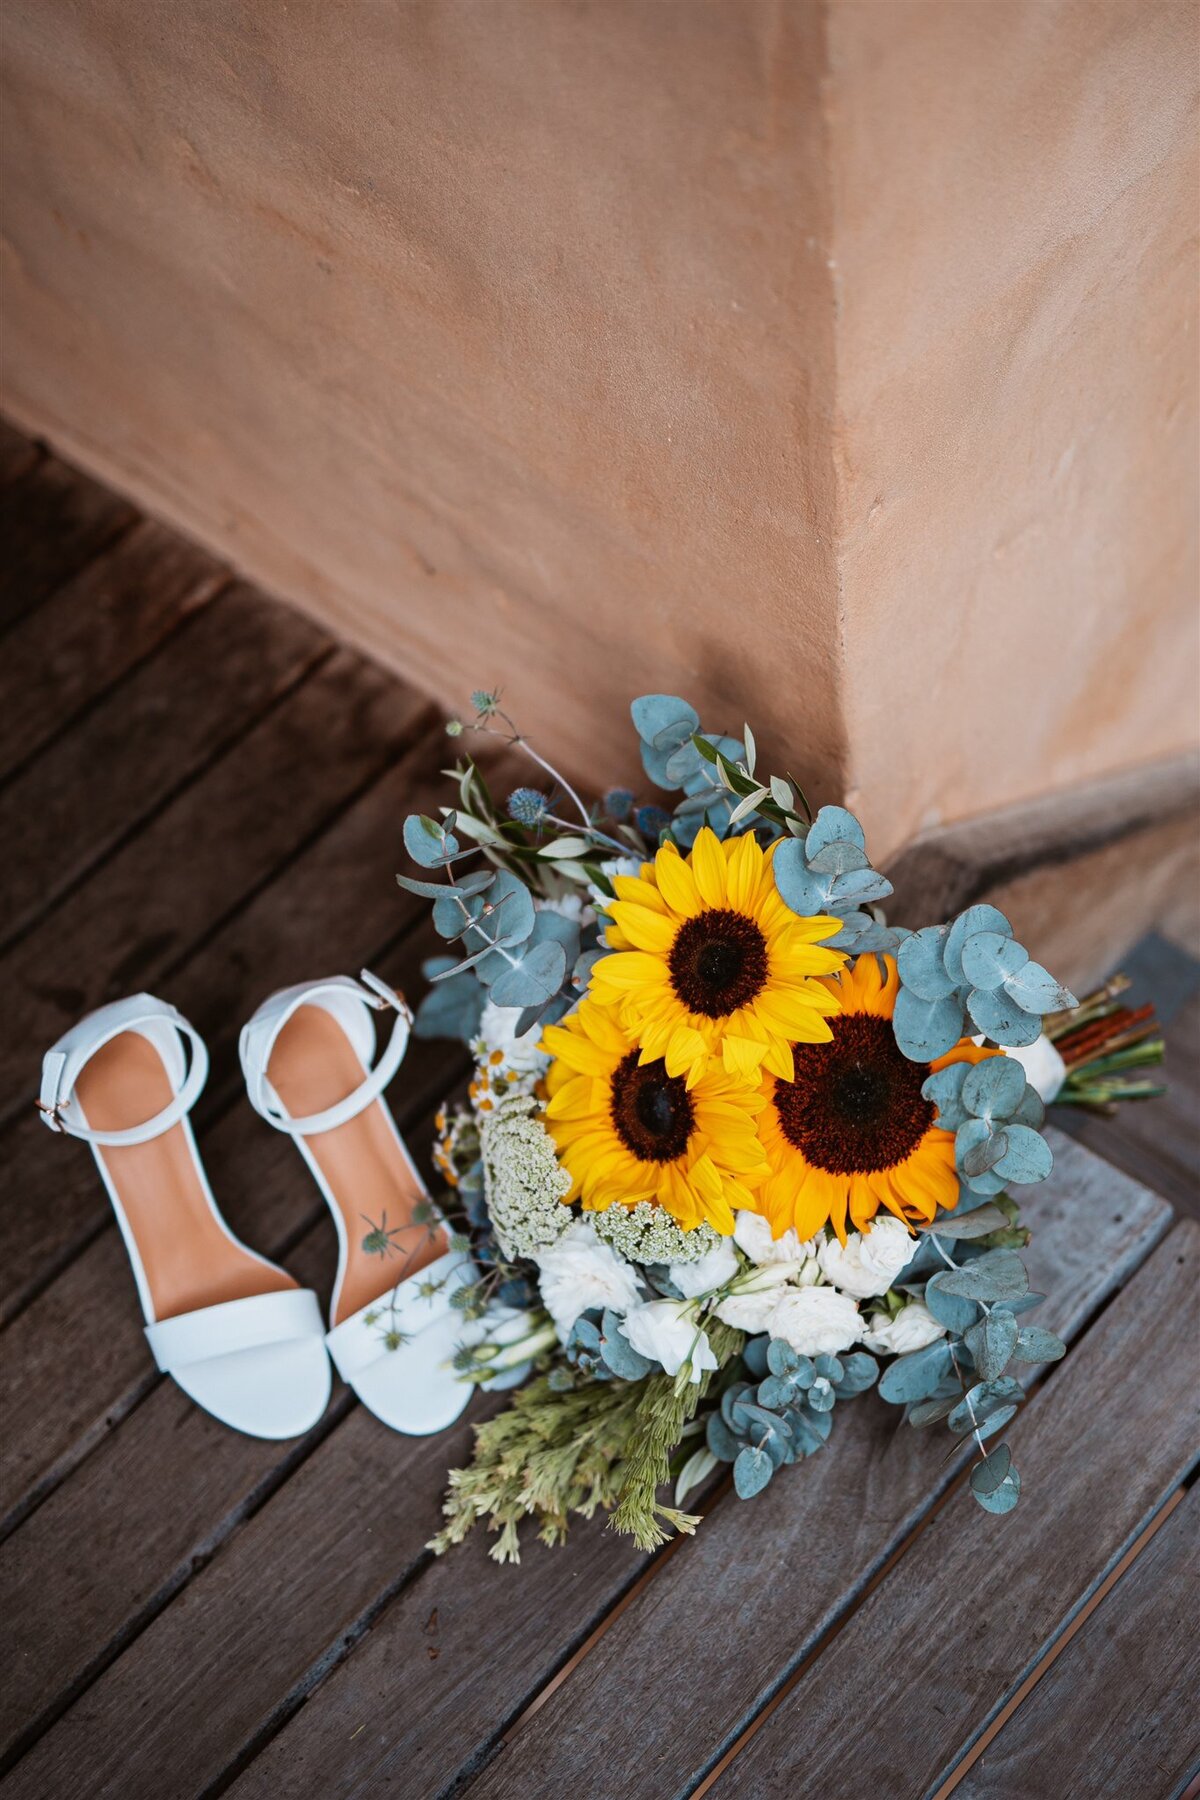 Kara's beautiful wedding shoes together with her flowers